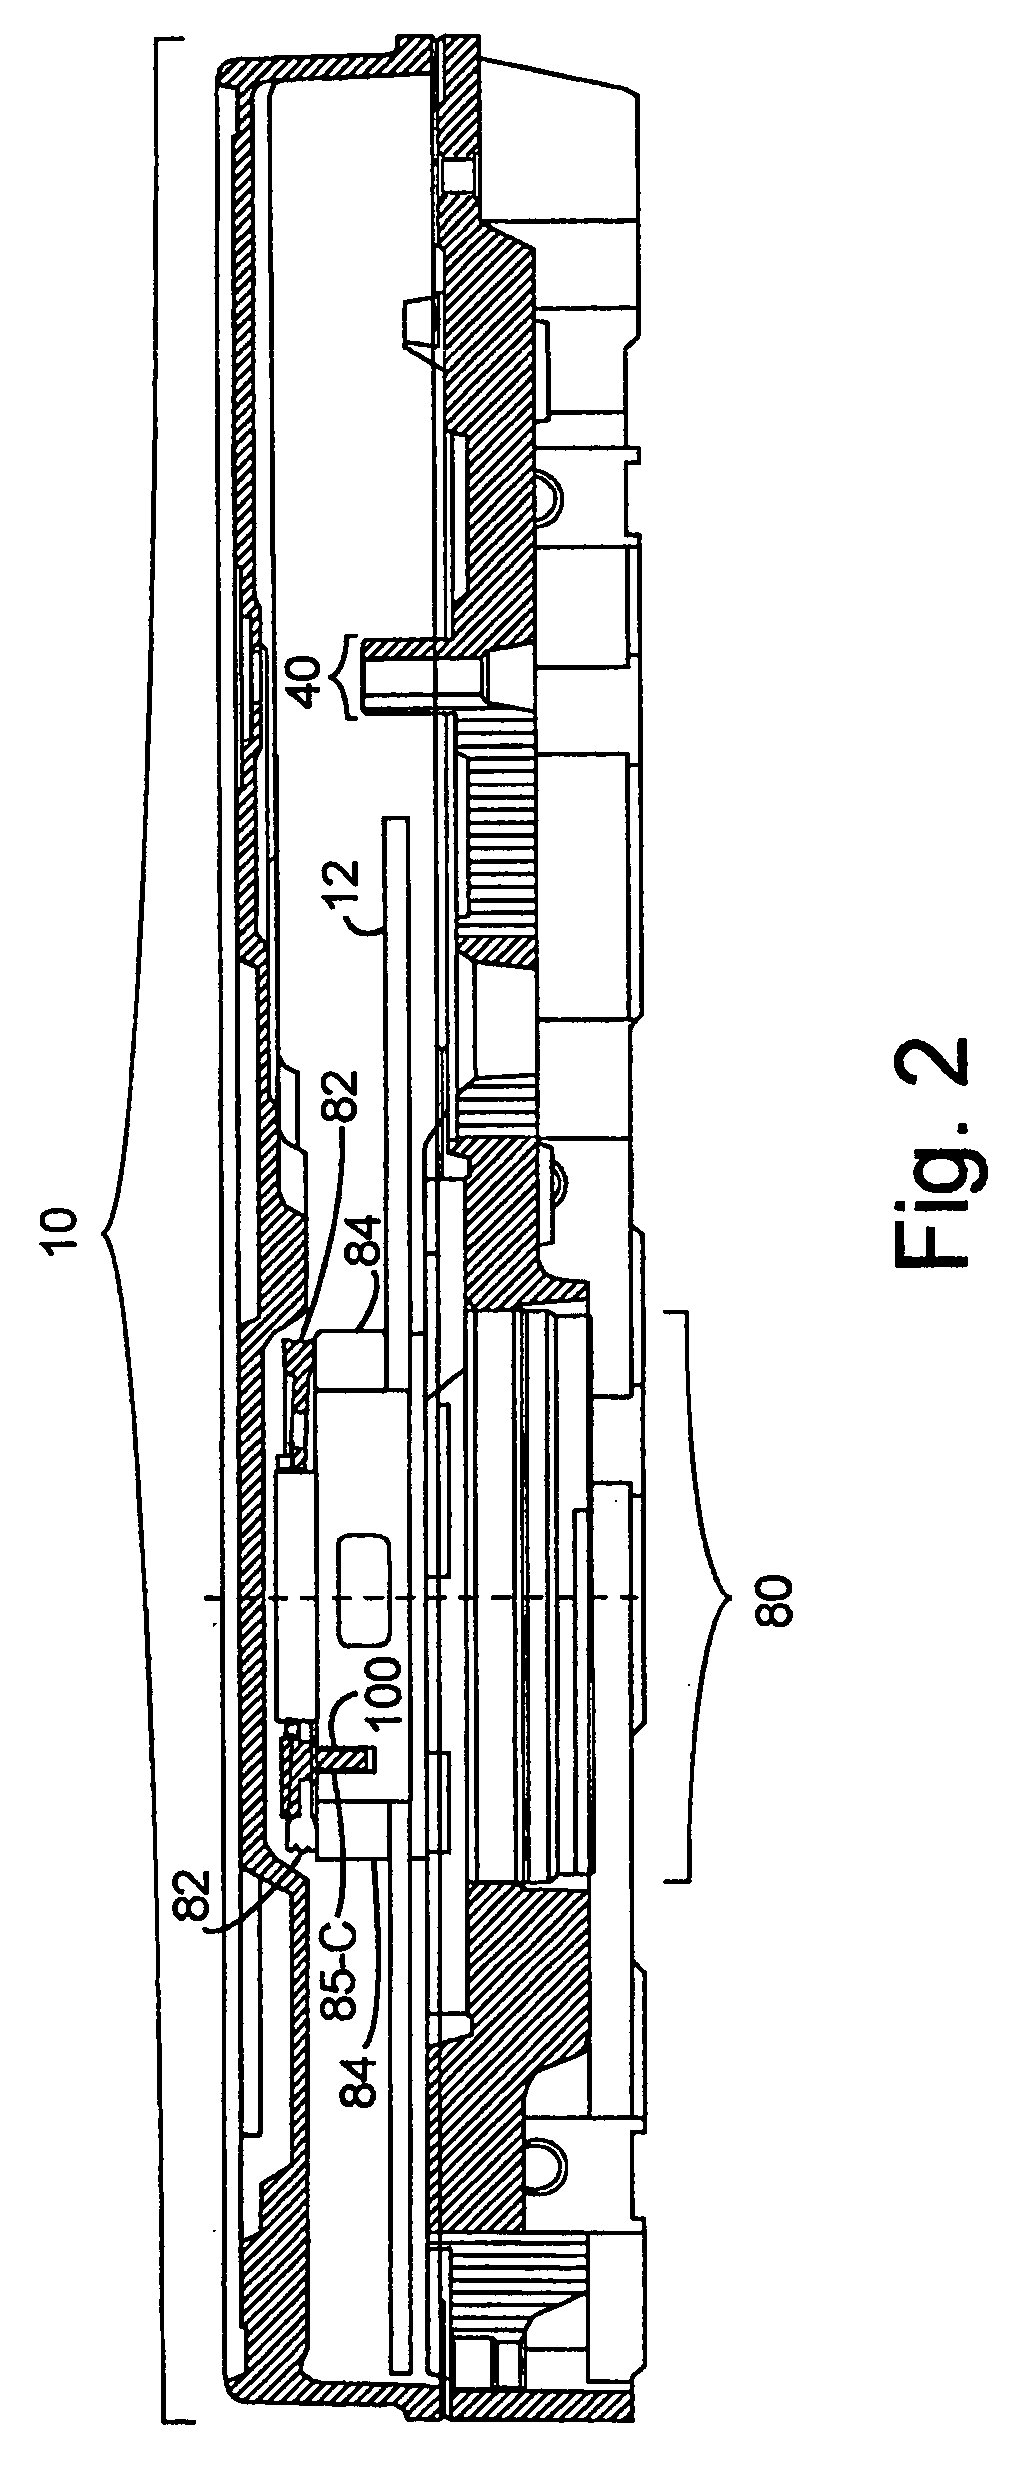 Method and apparatus for mechanically balancing the disk pack of a hard disk drive